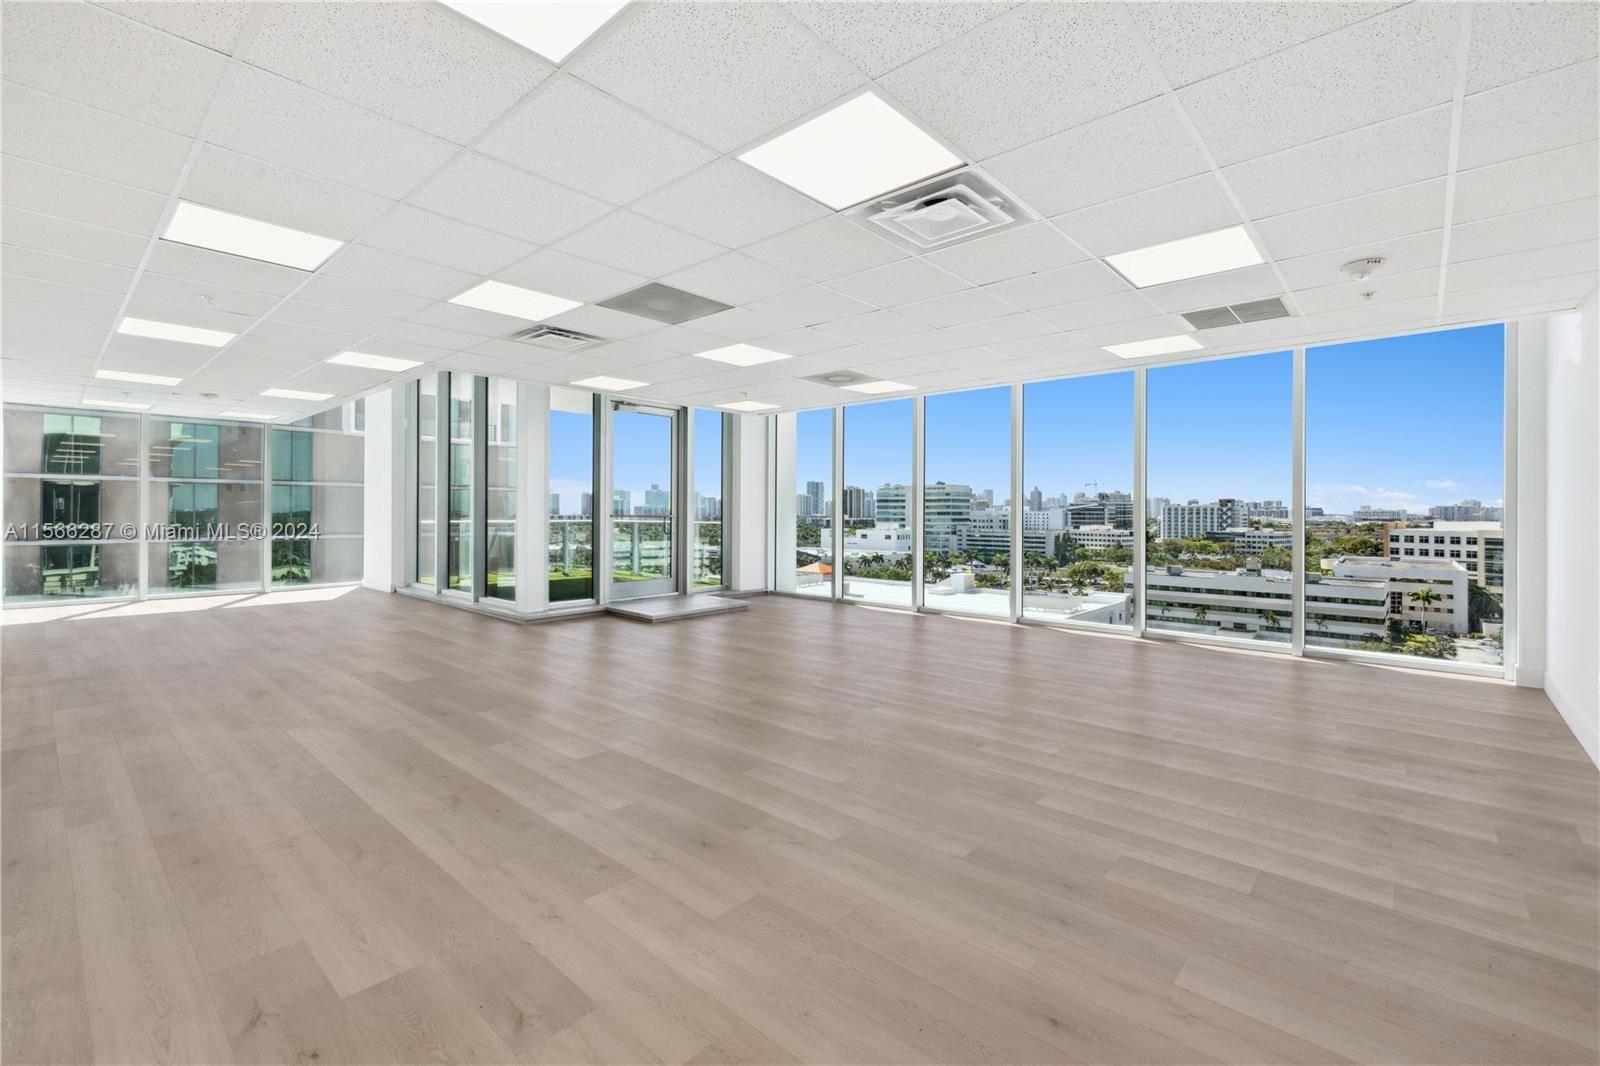 In the heart of Aventura Medical District, Offices at Ivory 214, a Commercial Condominium, is a contemporary mixed use Class A and Leed Gold Certified Building with 34 medical and ...